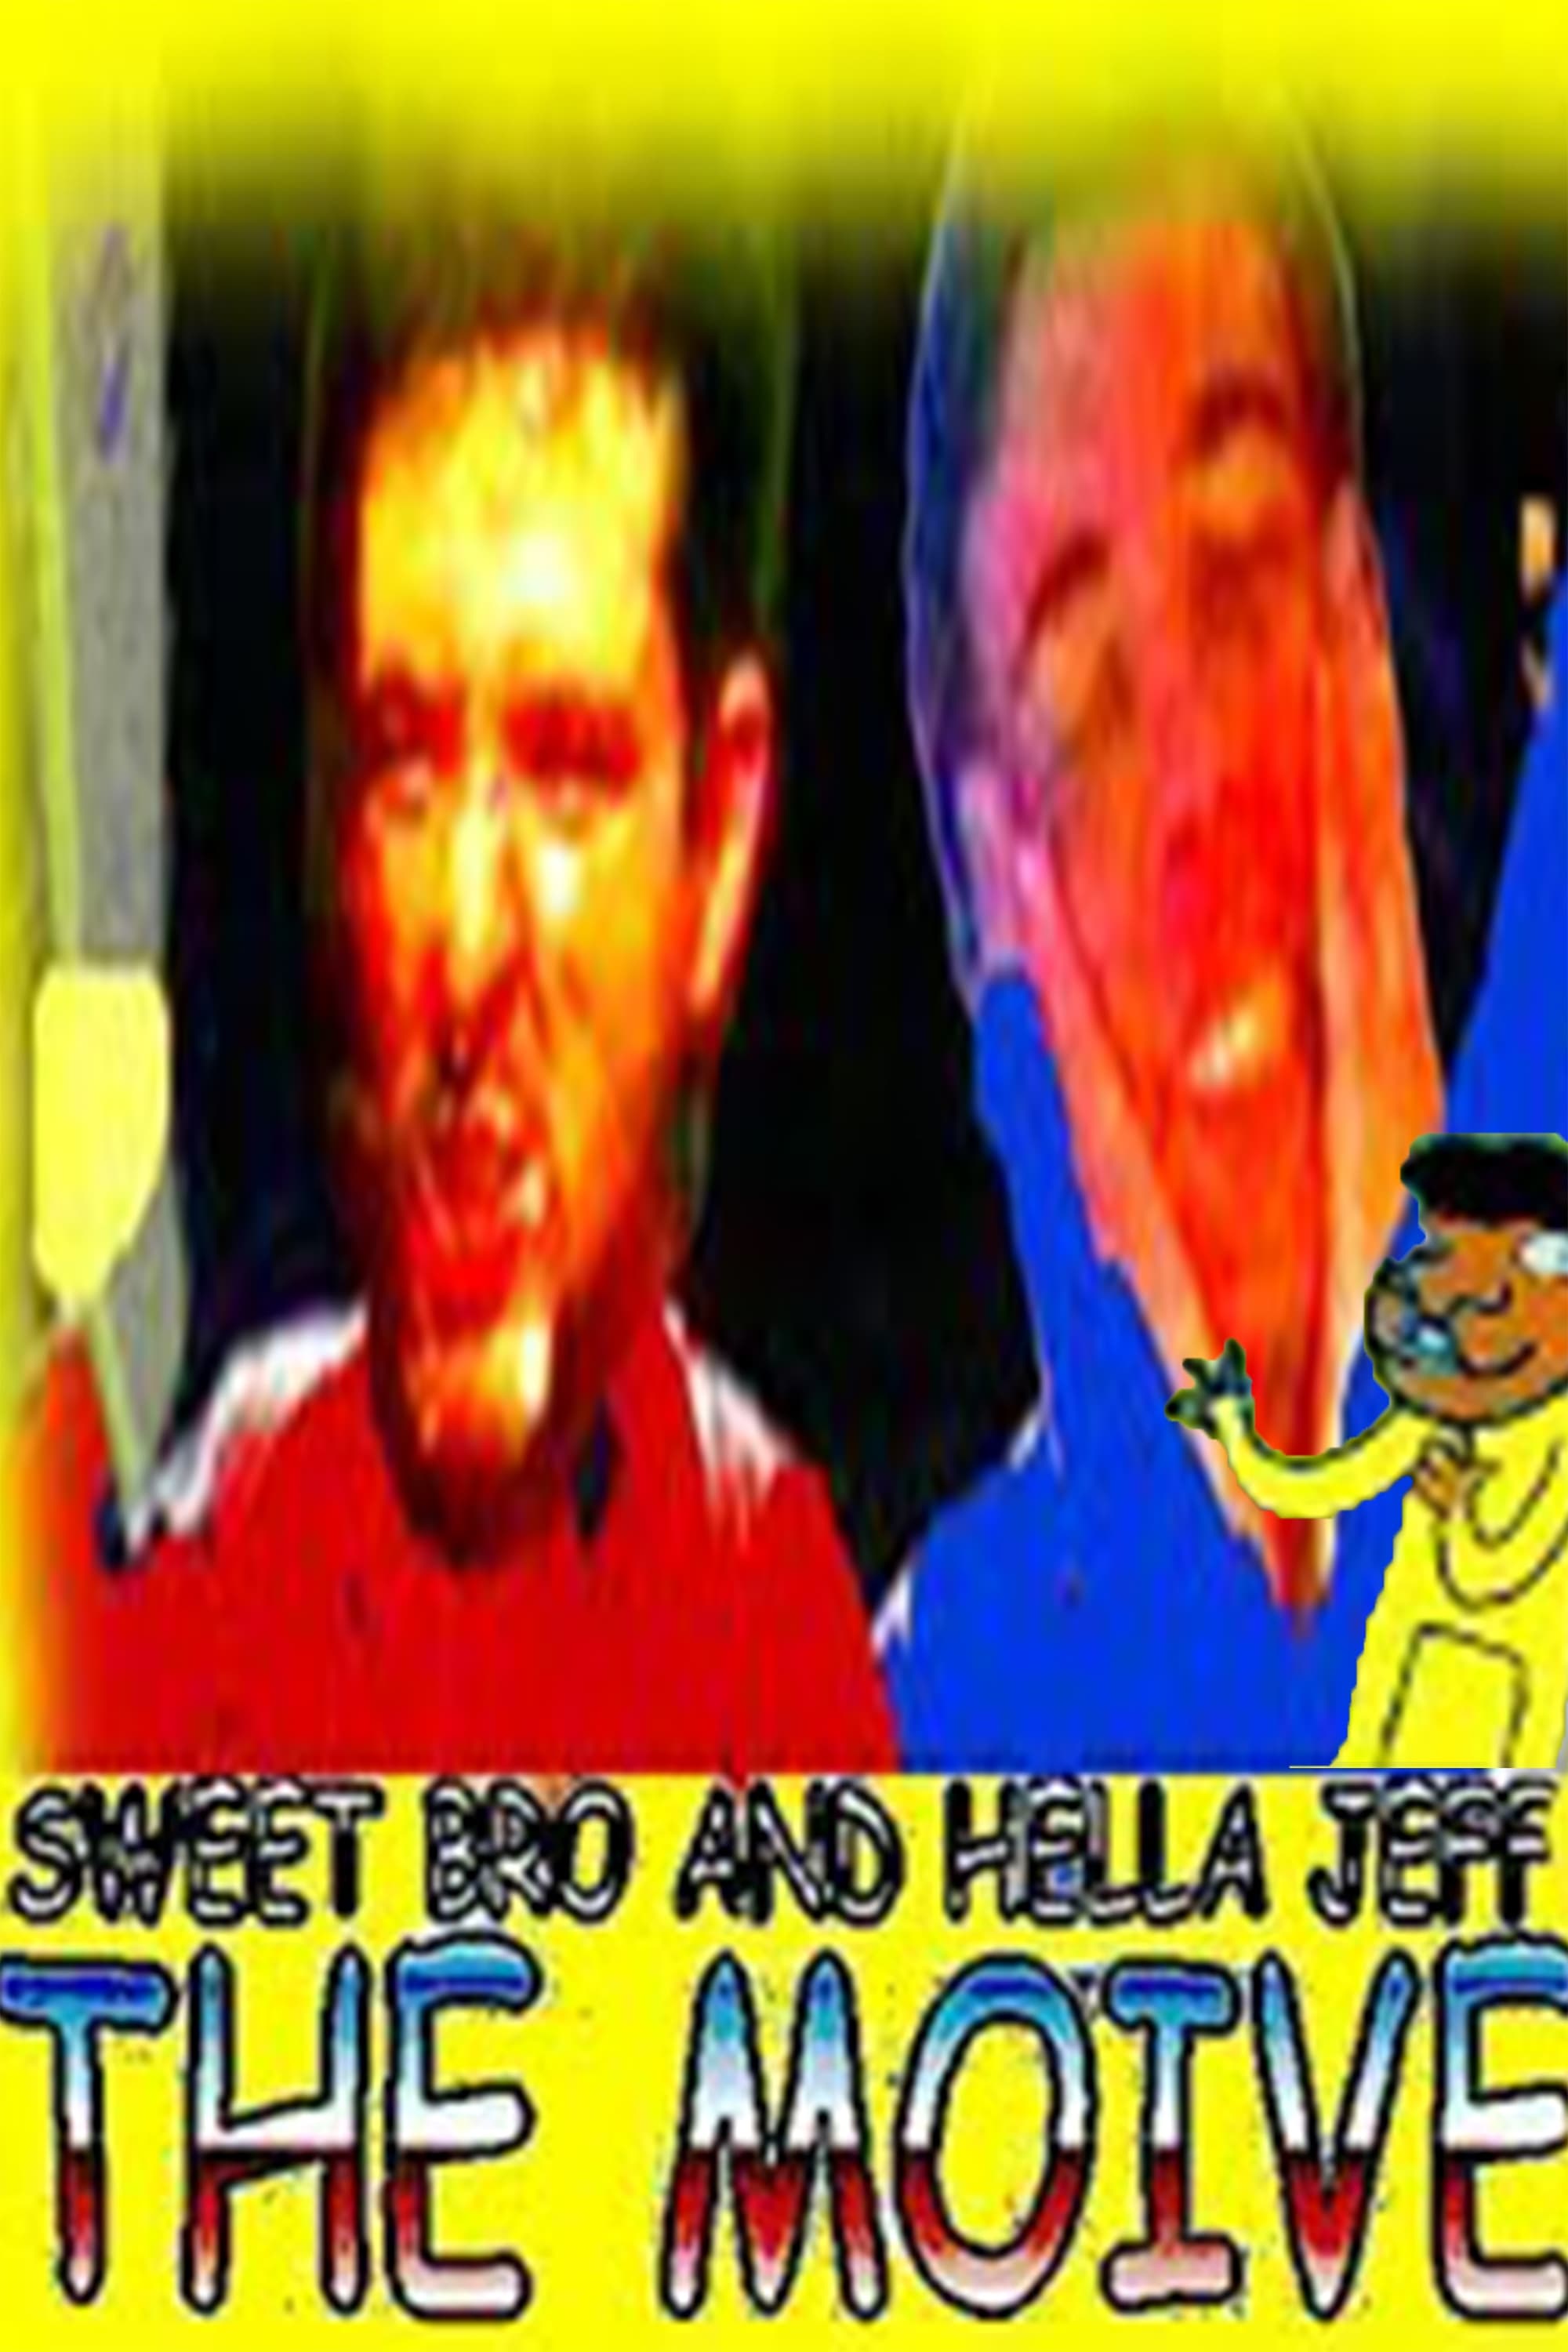 Sweet Bro and Hella Jeff the Moive